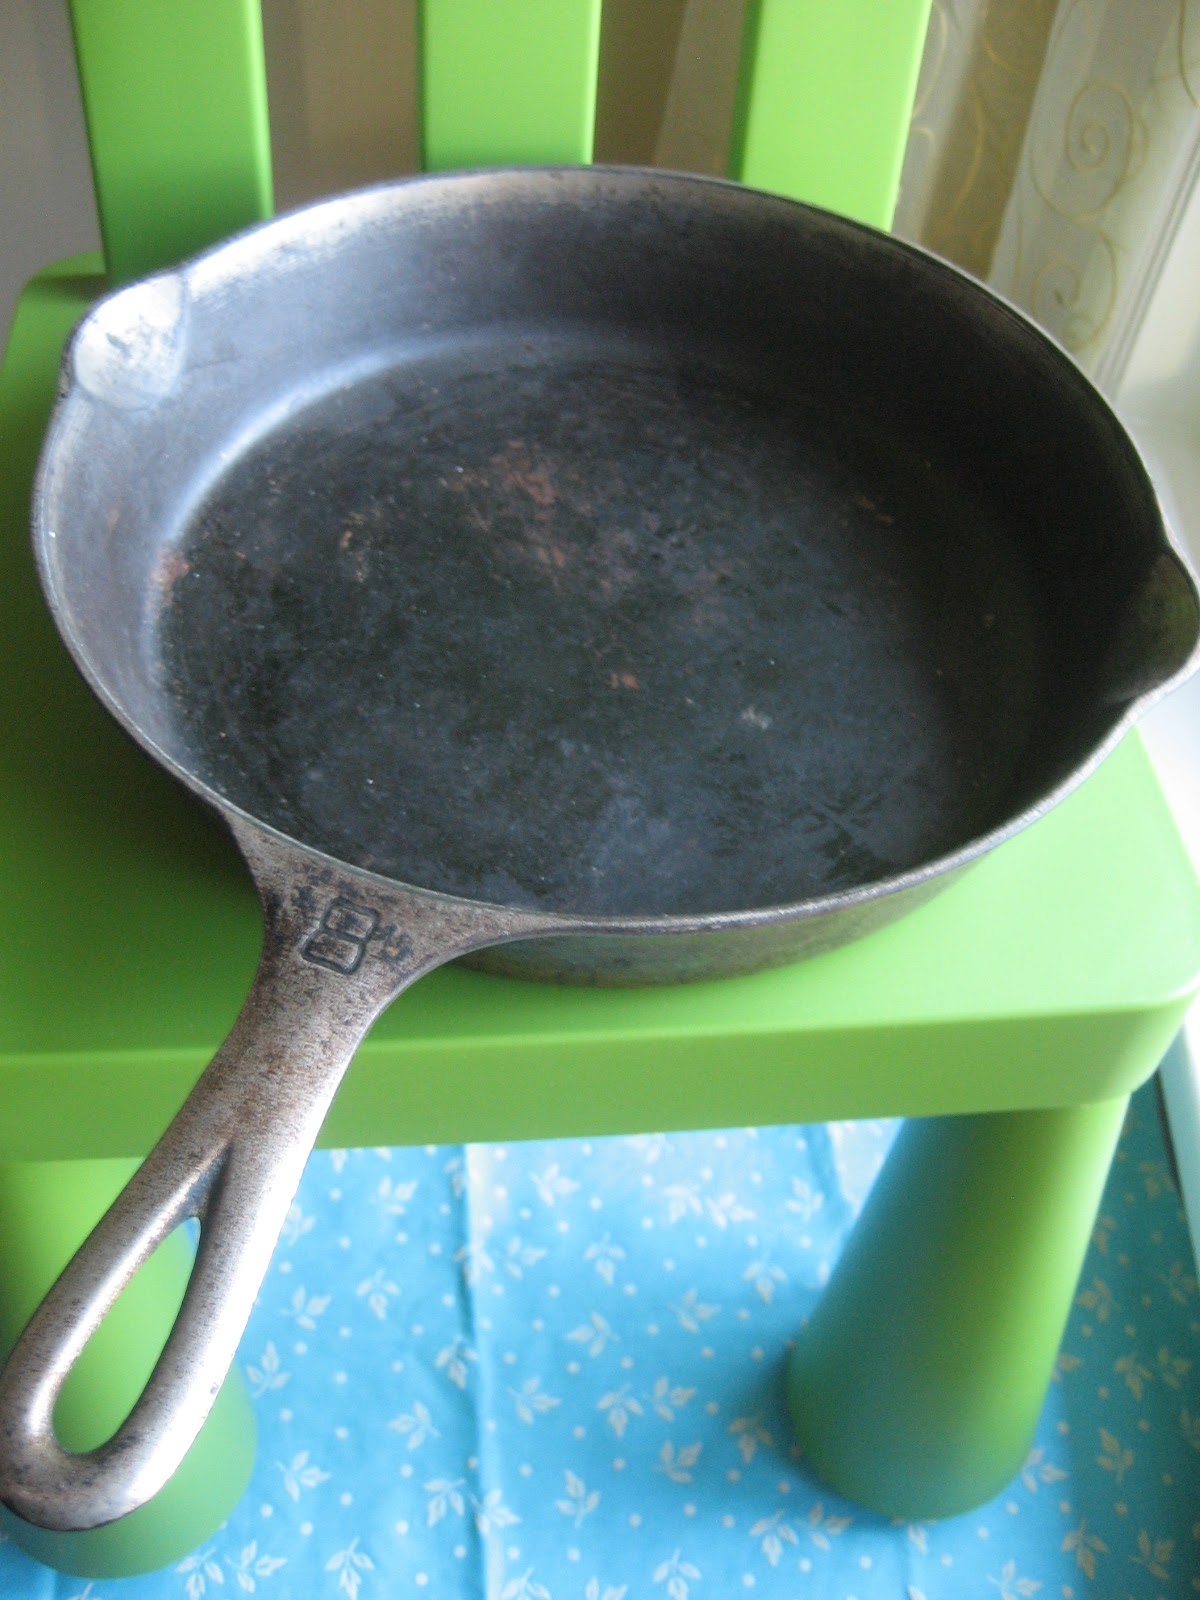 Six Balloons Vintage Delights: Griswold Cast Iron Skillets Part II